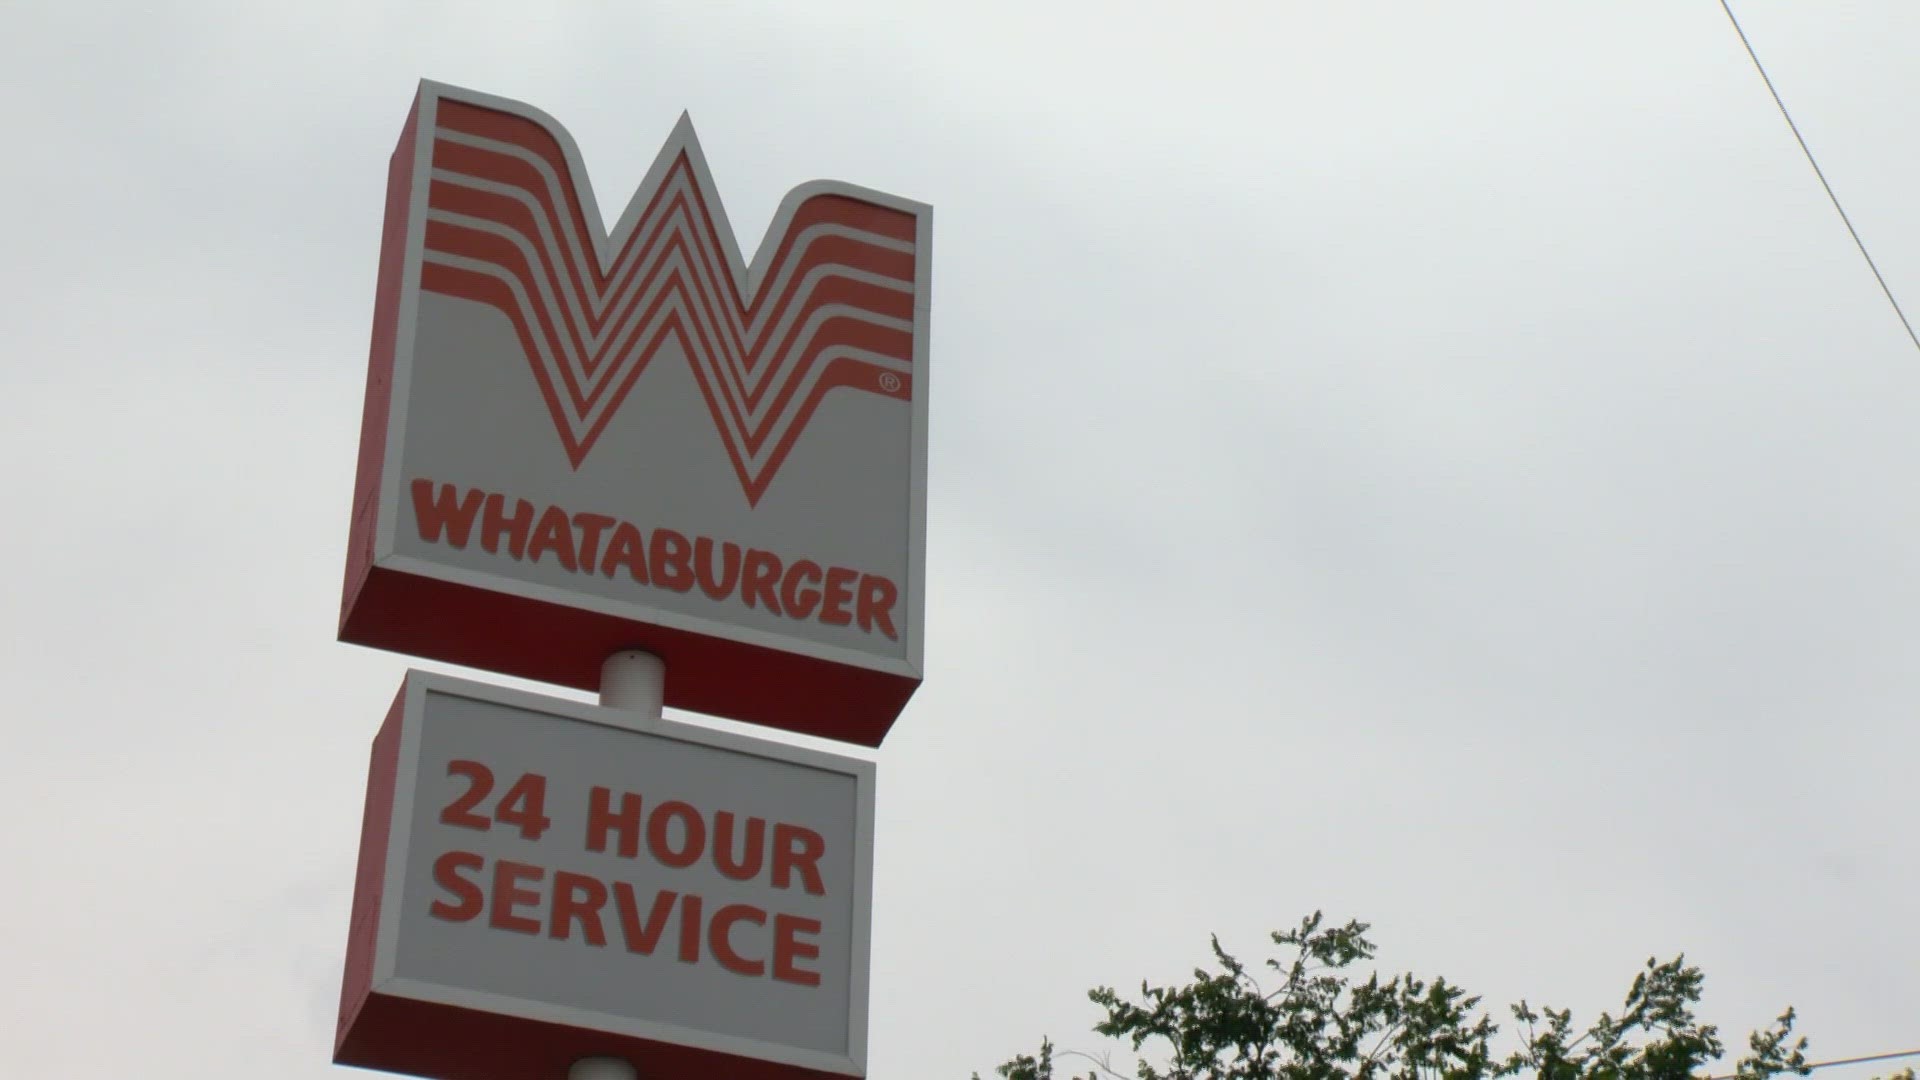 At a westside Whataburger, a father-daughter duo told KENS 5 it’s not how it sounds but how it tastes that matters.